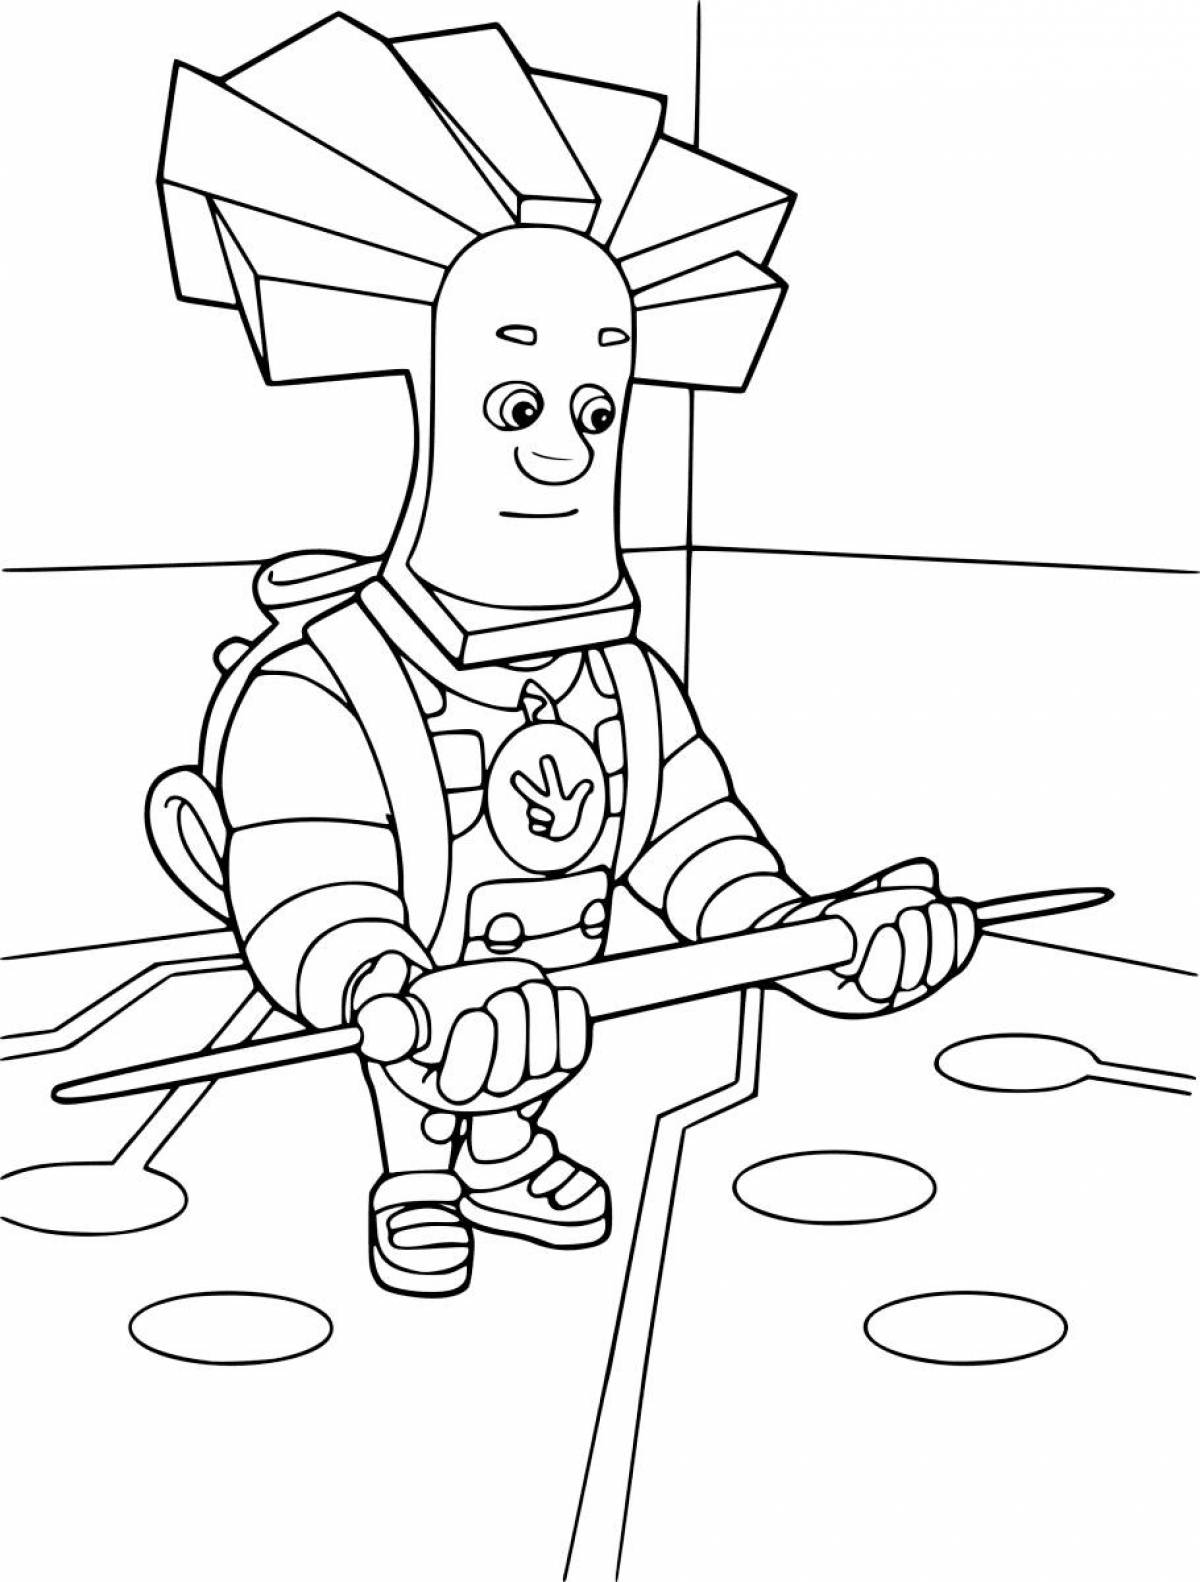 Royal coloring pages heroes